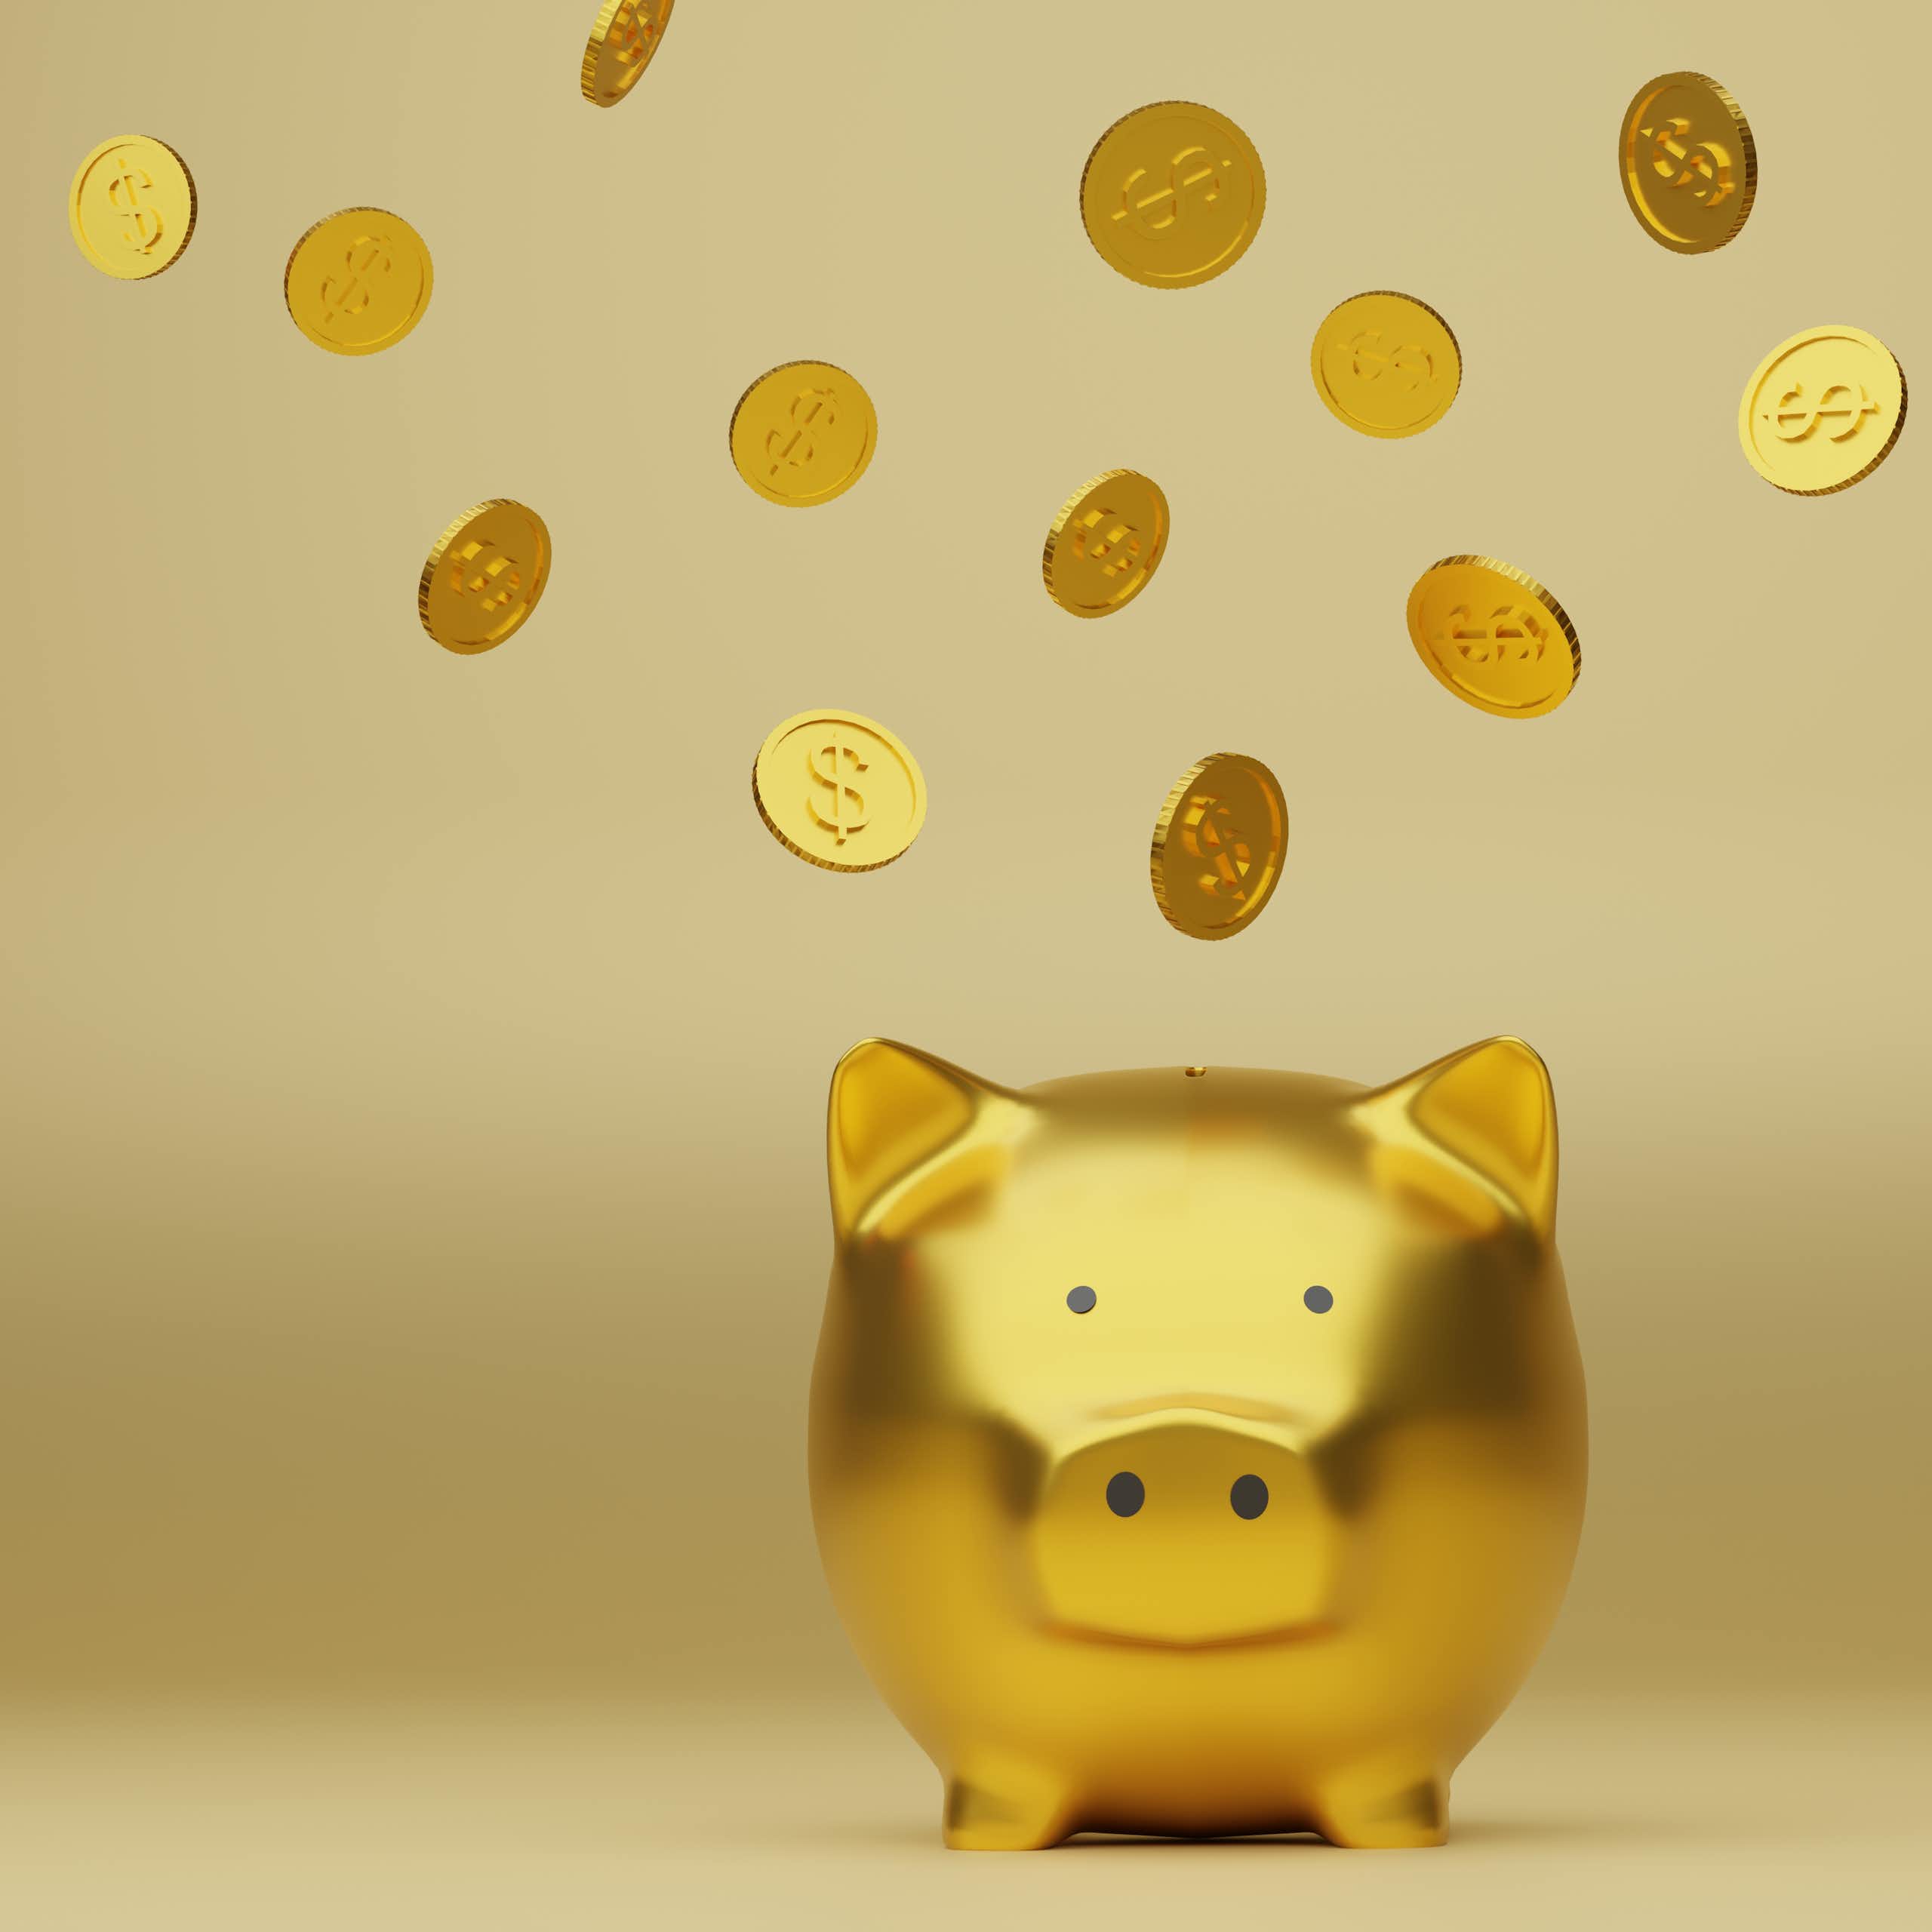 A golden piggy bank with gold coins flying around it.